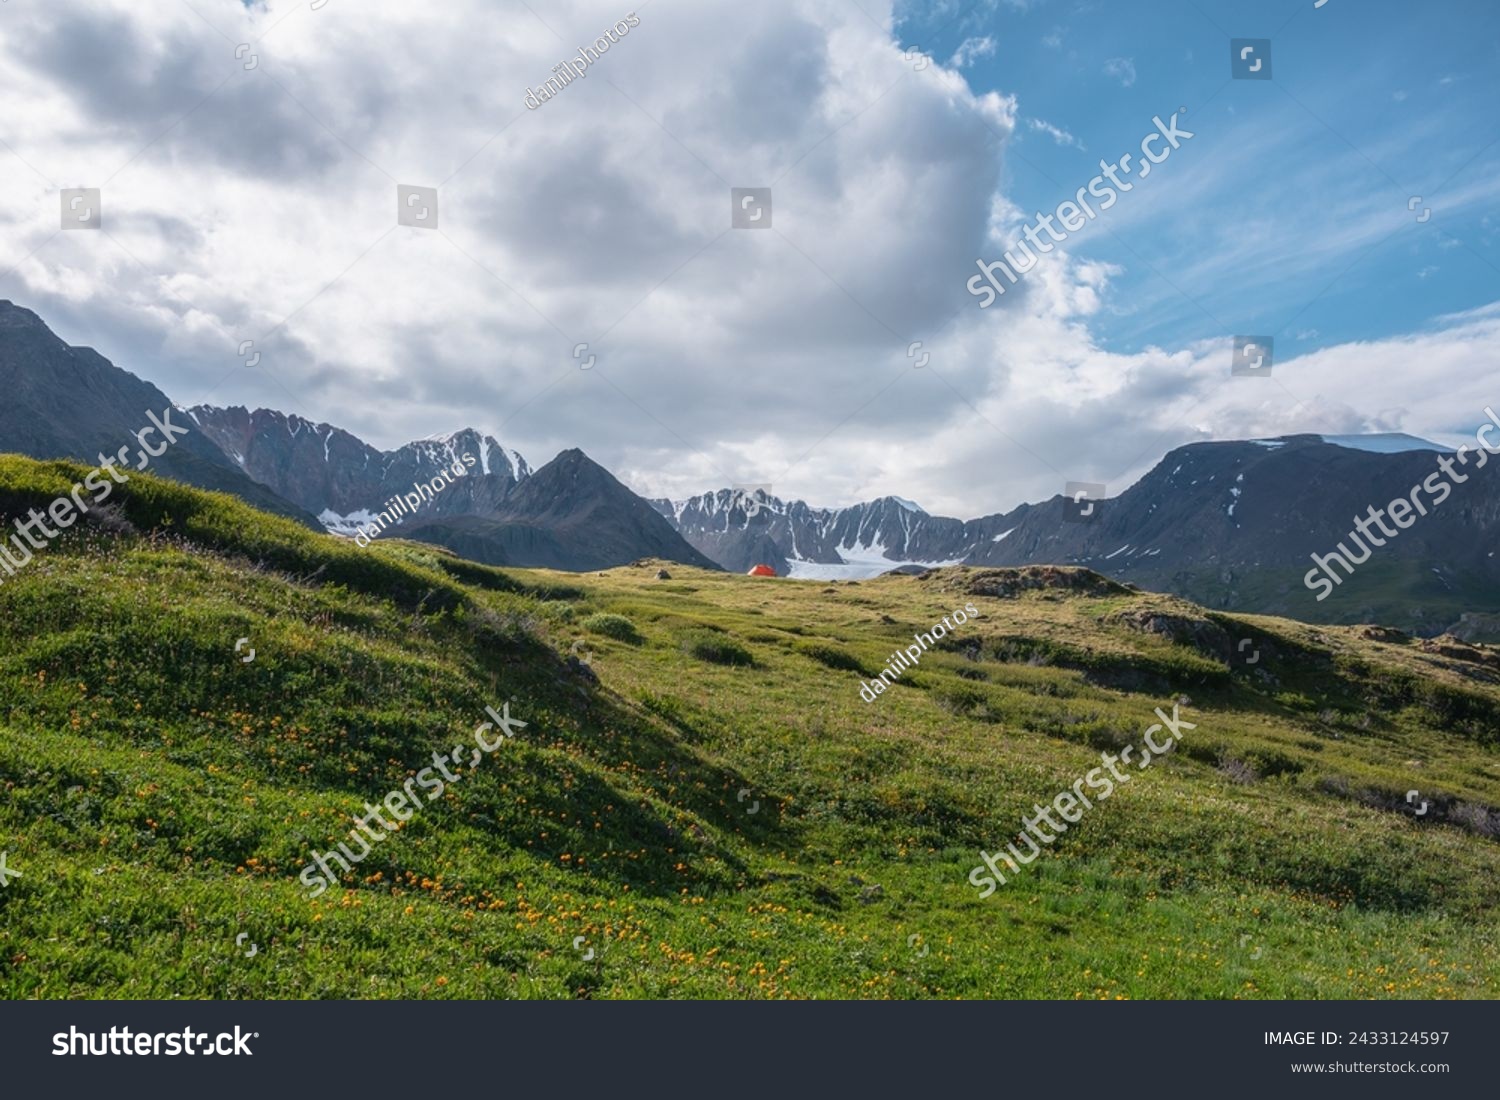 Wonderful blooming orange flowers and vivid orange tent on grassy hill in sunlight against snow mountain range silhouette. Colorful amazing scenery with lush alpine flora on sunlit flowering meadow. #2433124597